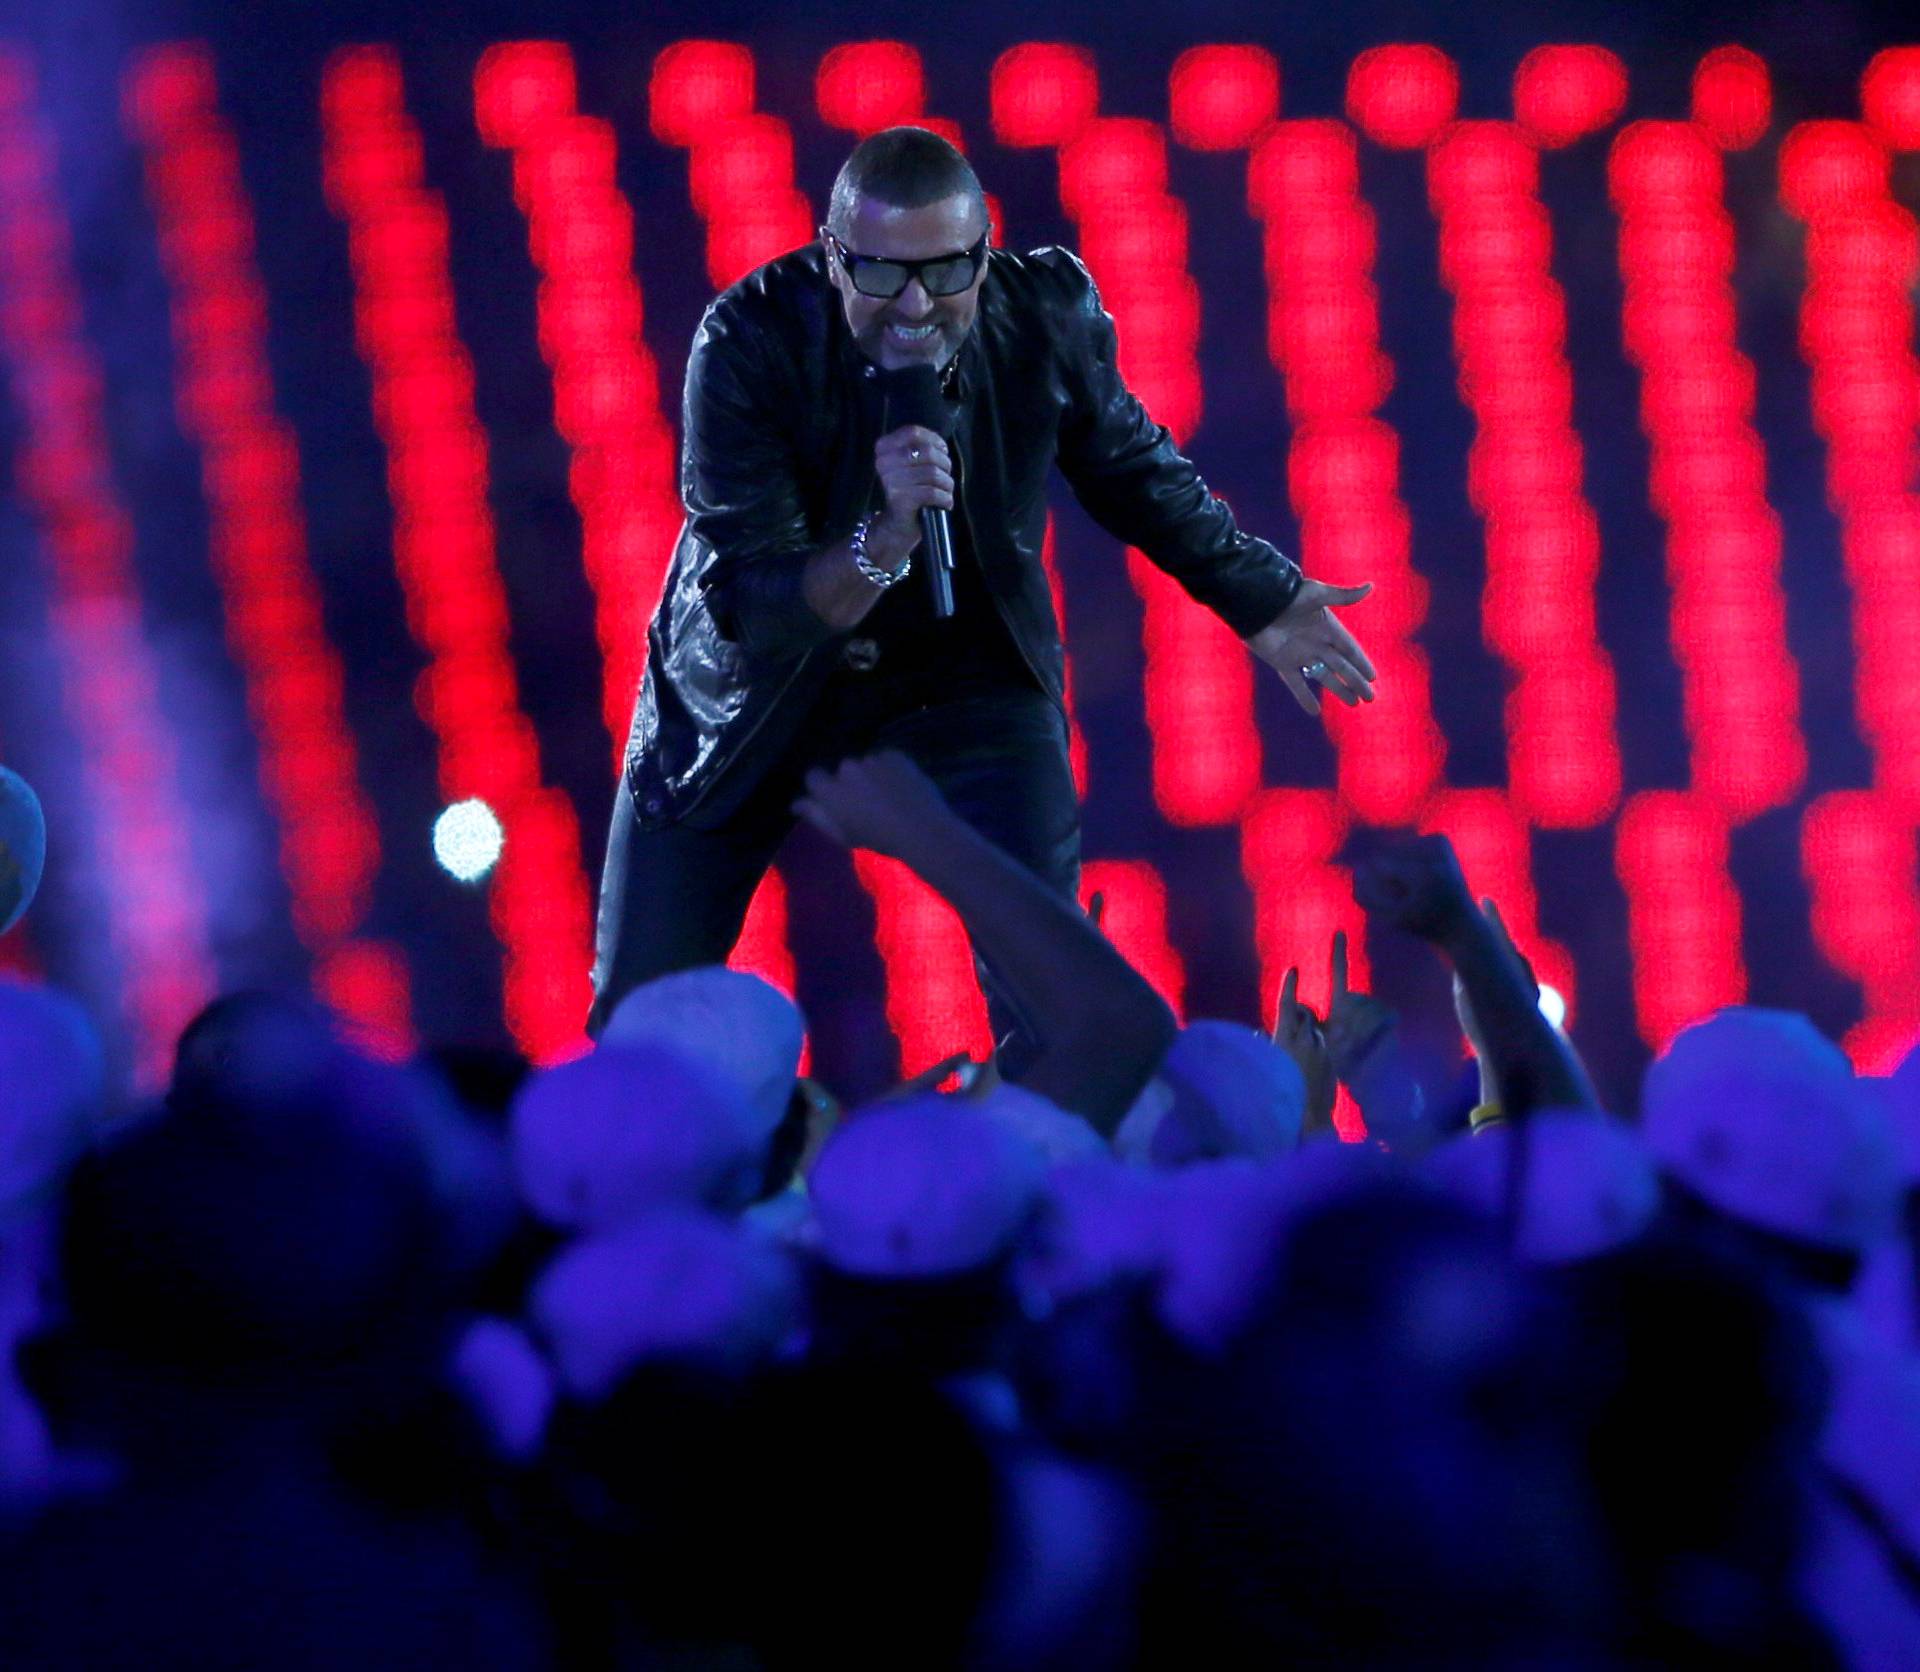 FILE PHOTO: Singer George Michael performs during the closing ceremony of the London 2012 Olympic Games at the Olympic Stadium